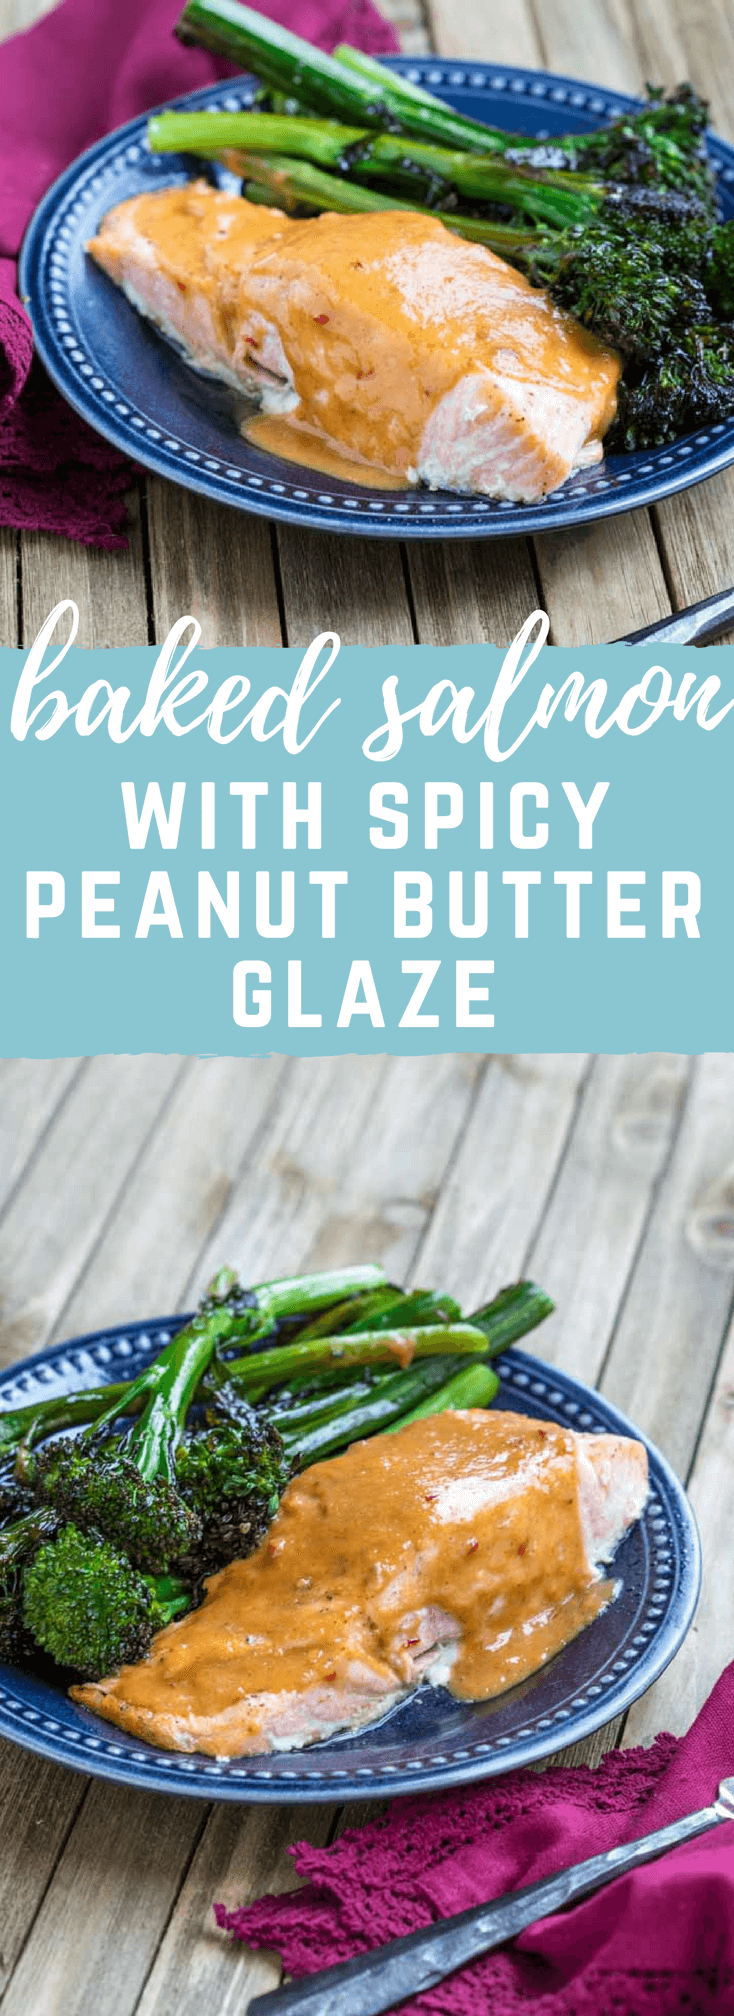 Easy Baked Salmon with Spicy Peanut Butter Glaze-- a zesty, citrusy, peanut butter glaze that takes salmon to the next level. 